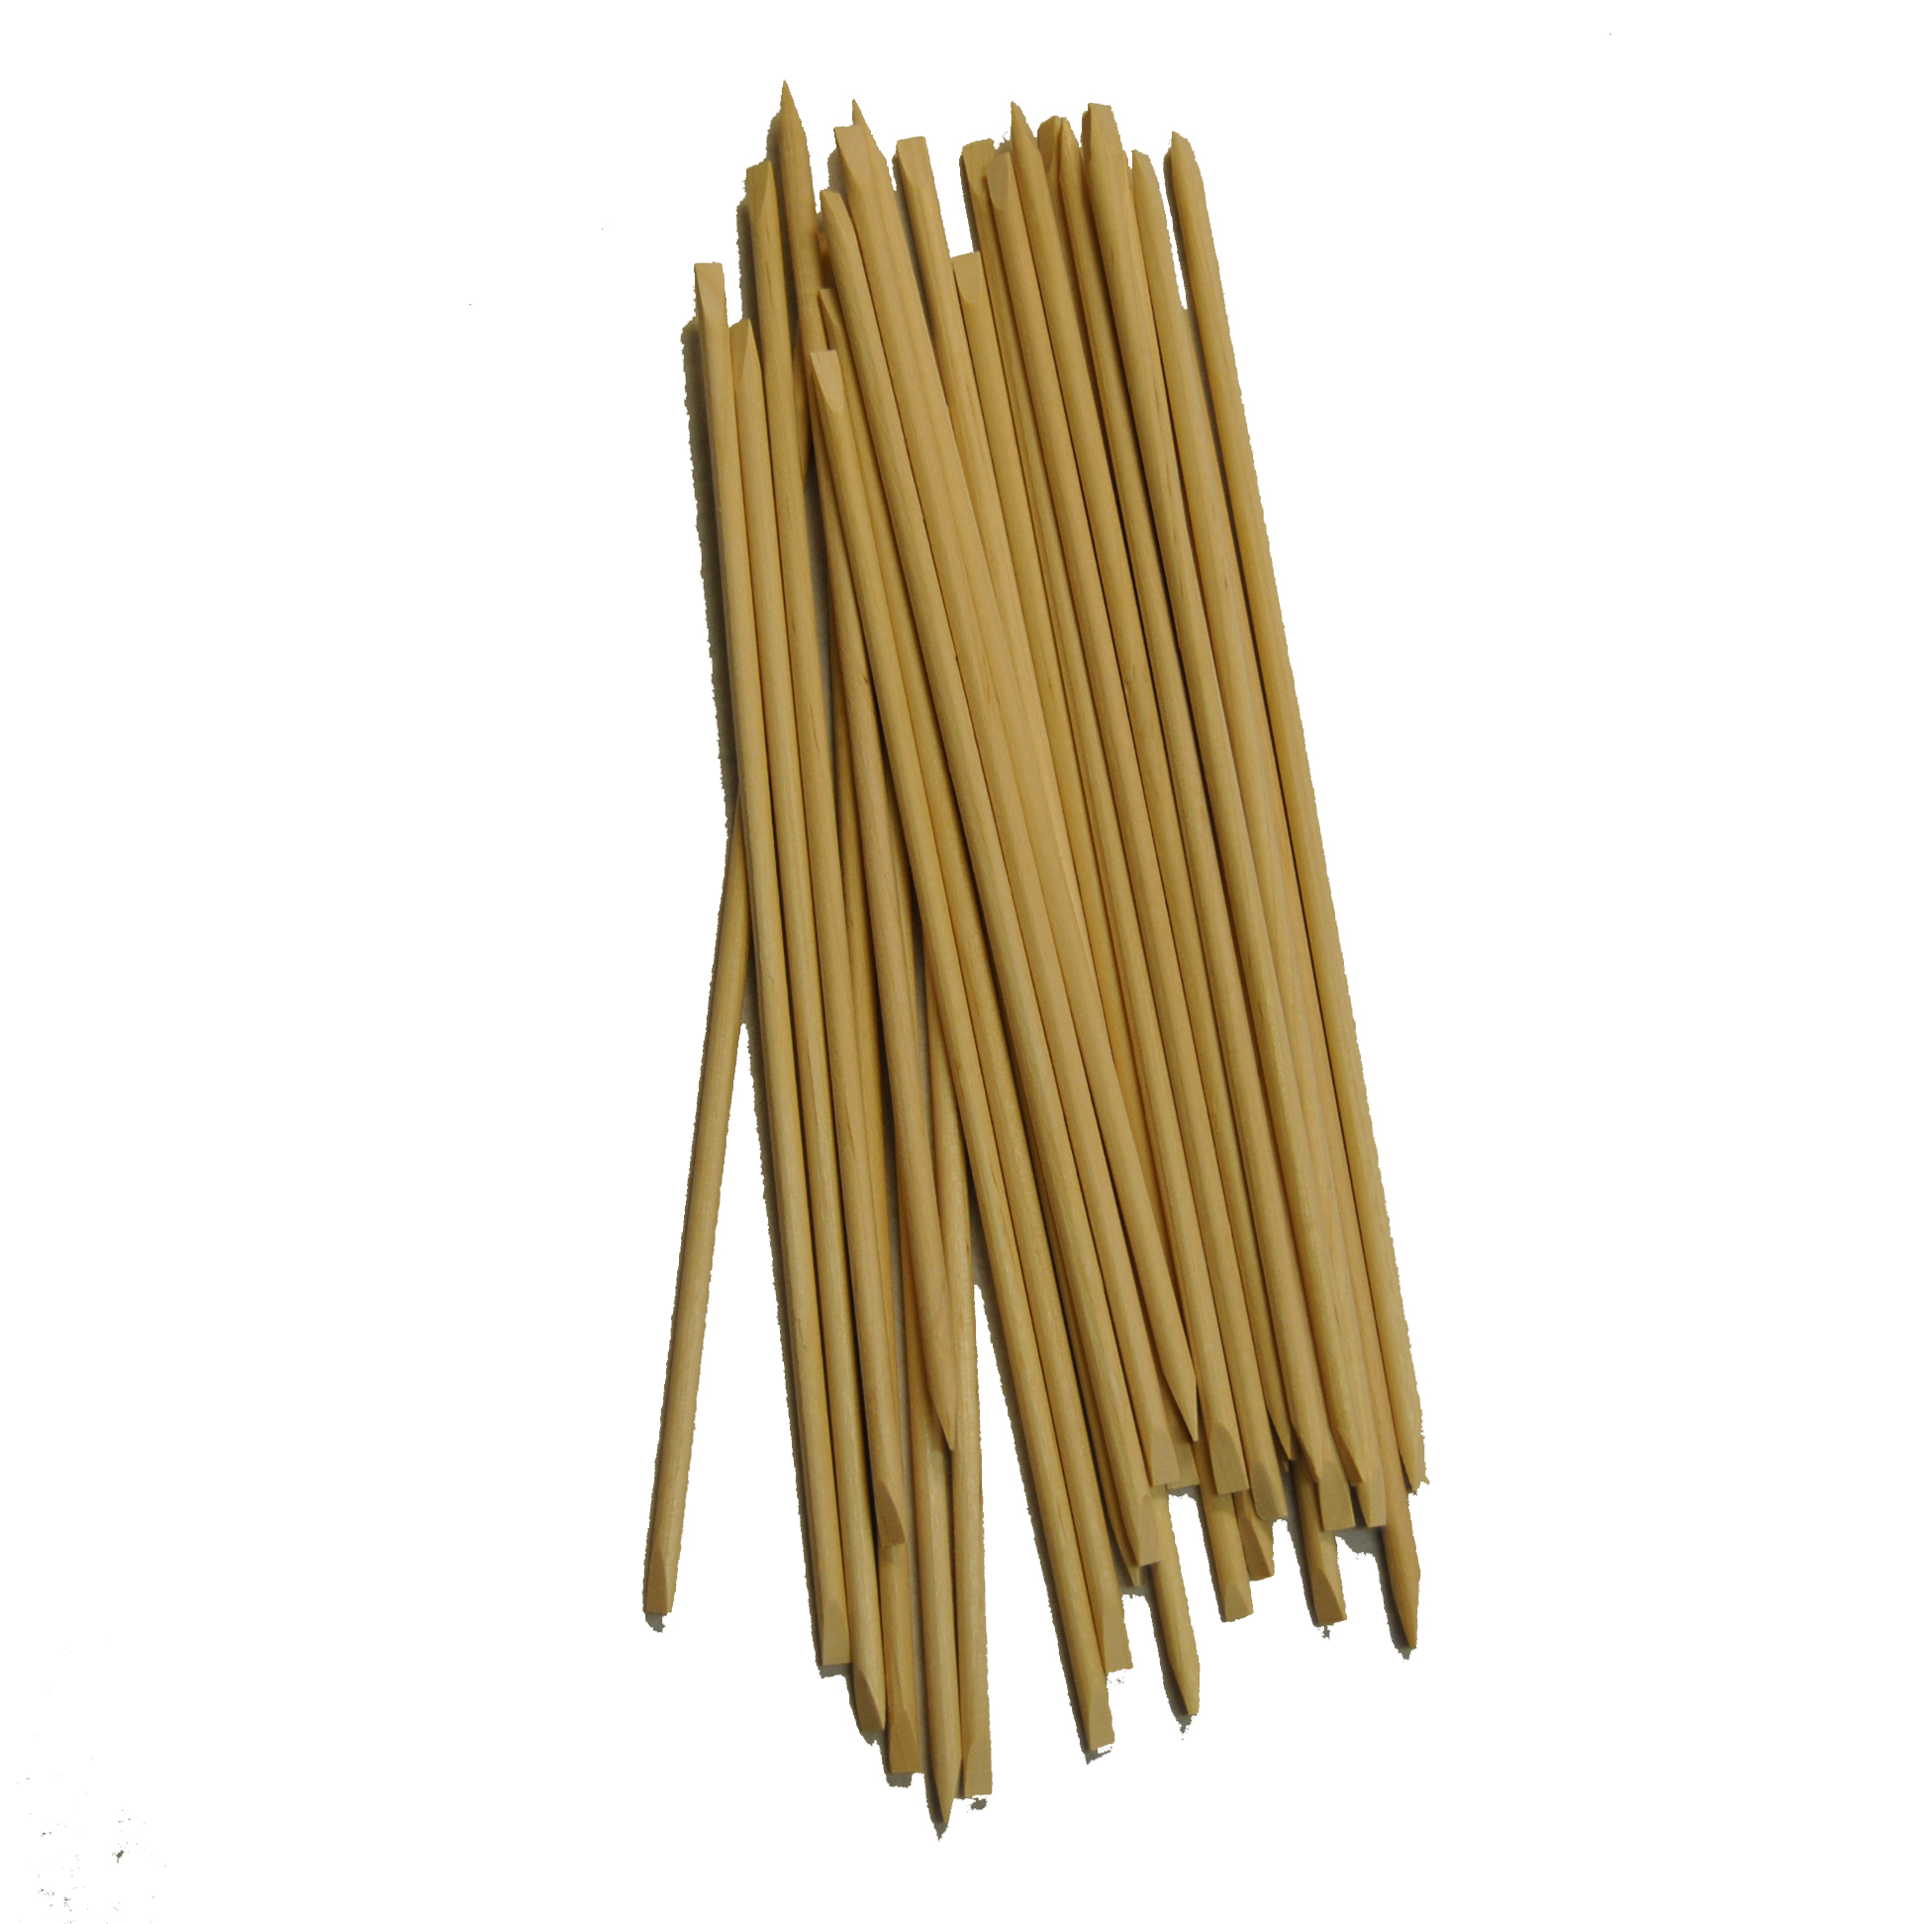 7 Coffee Stirrers With Round Ends Case of 10 boxes/1,000ct = 10,000ct  (Item# FS203)